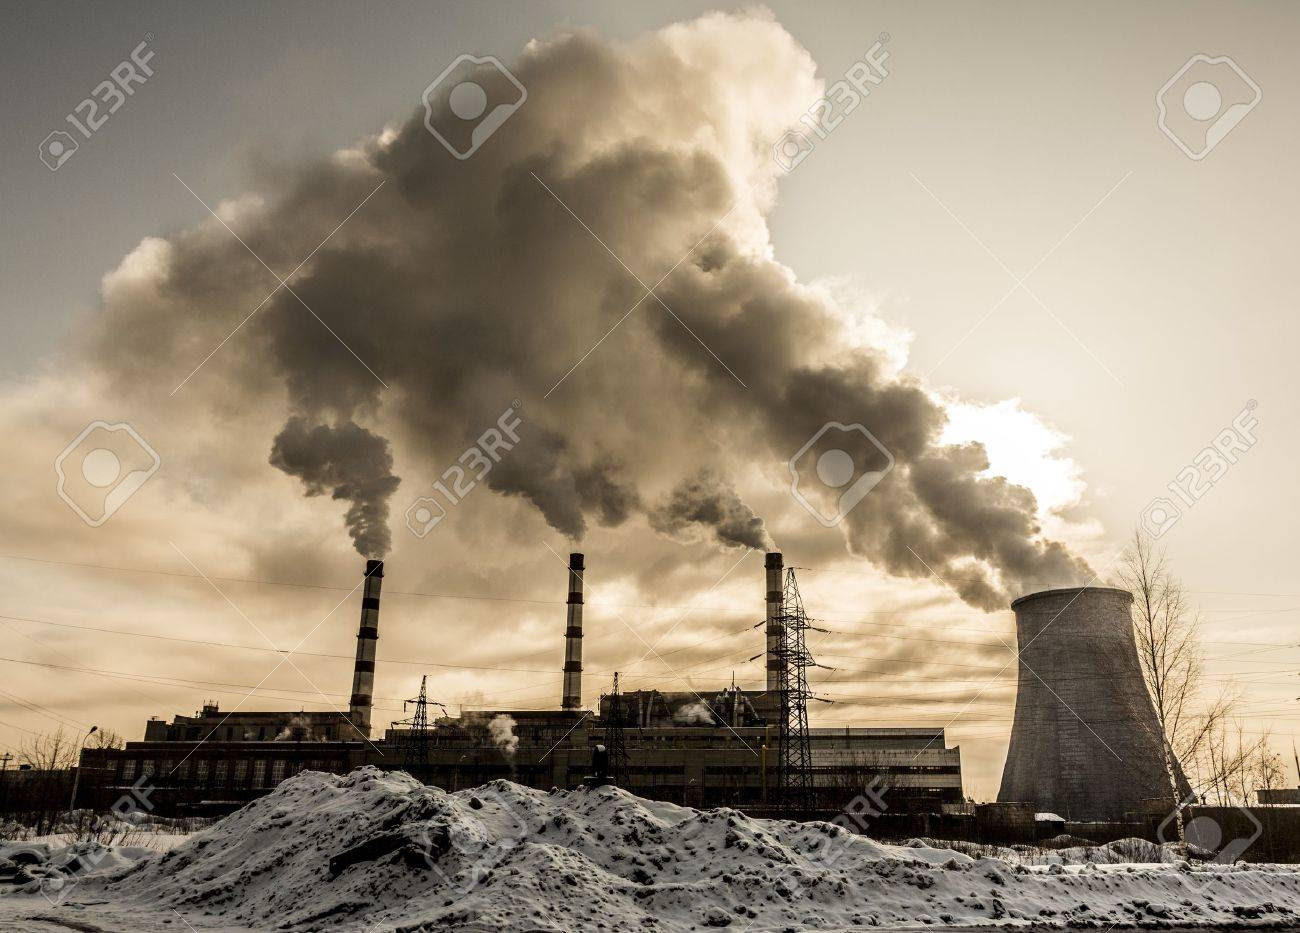 Factory pollutes the atmosphere harmful emissions. Russia, Yaroslavl - 18271440